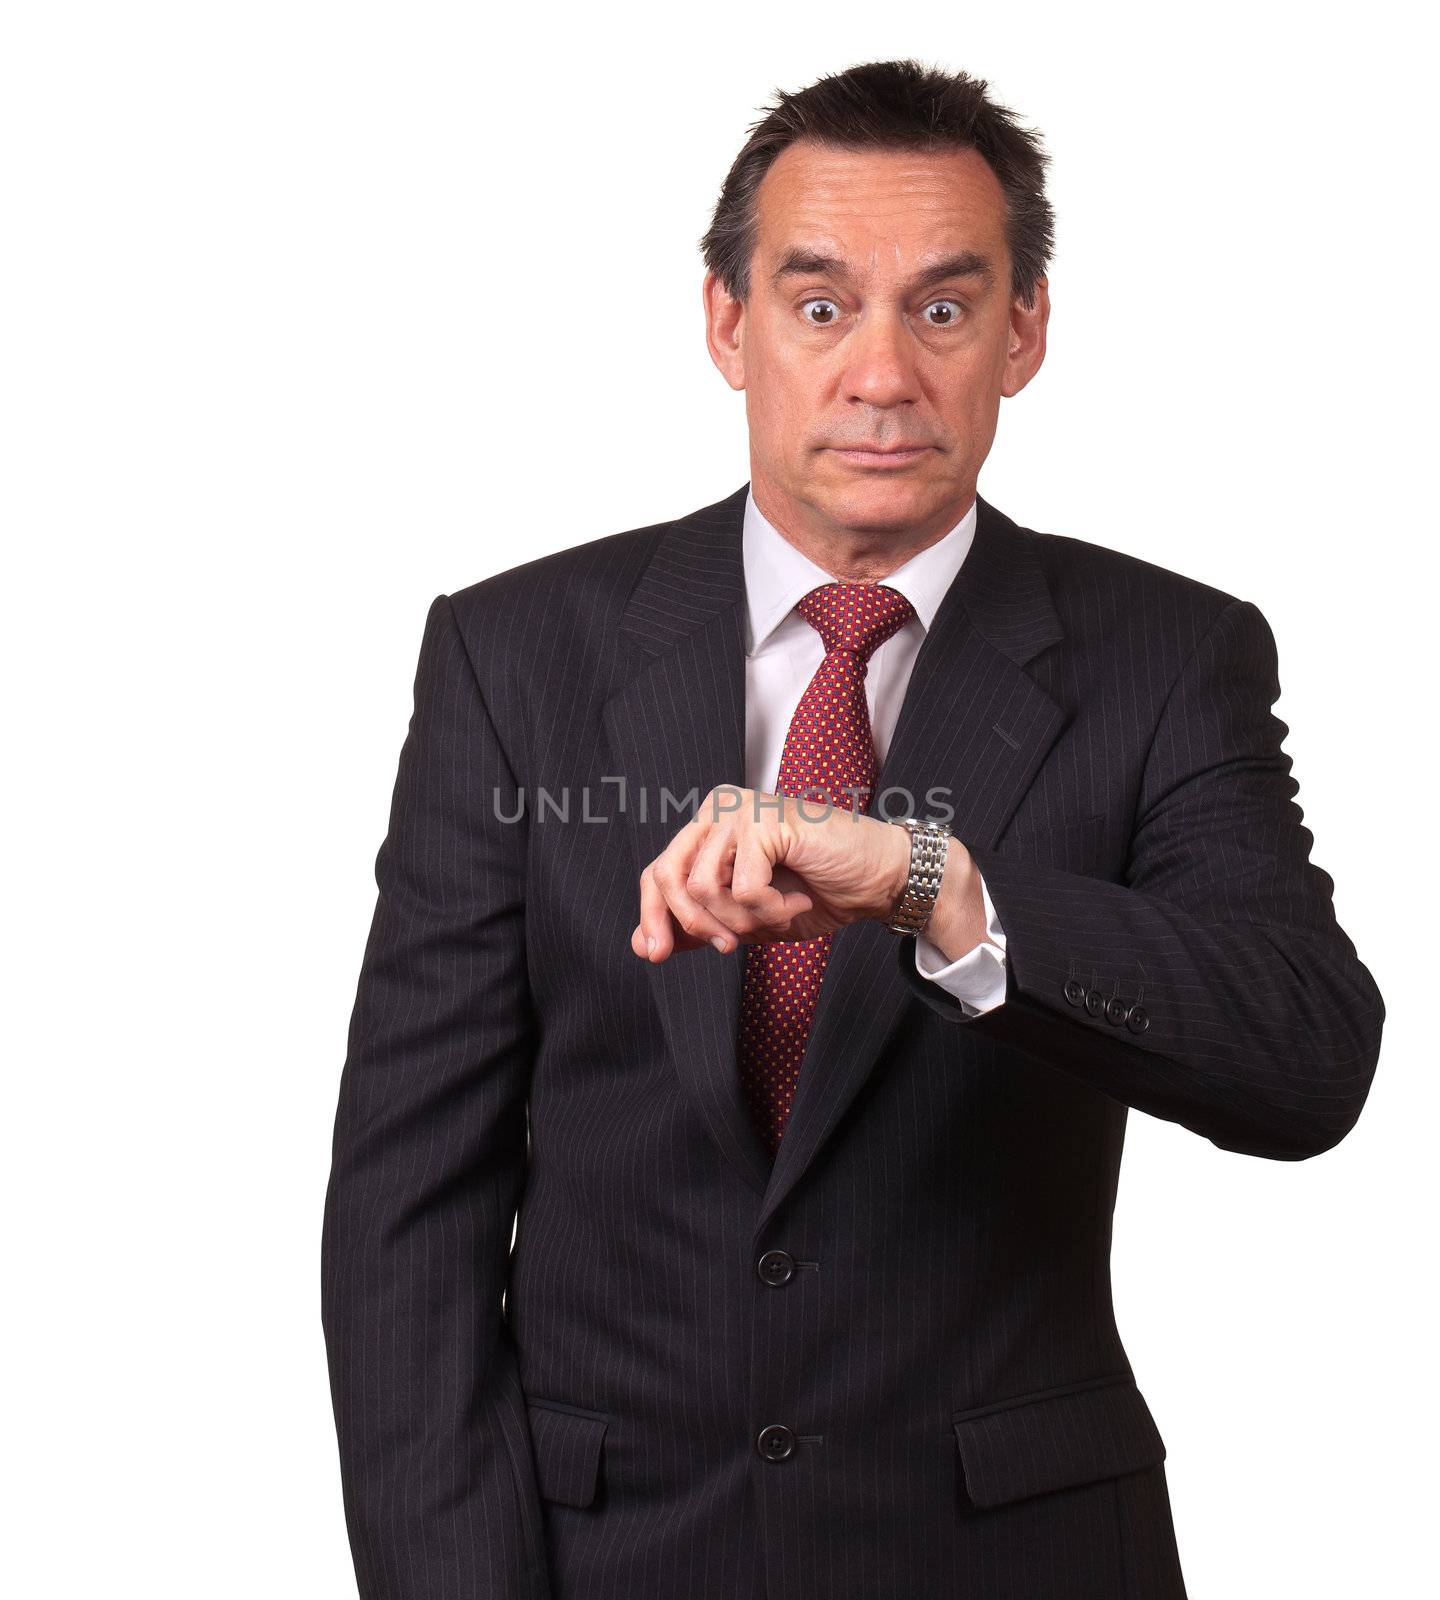 Attractive Middle Age Business Man in Suit Surprised at Time on Watch Isolated